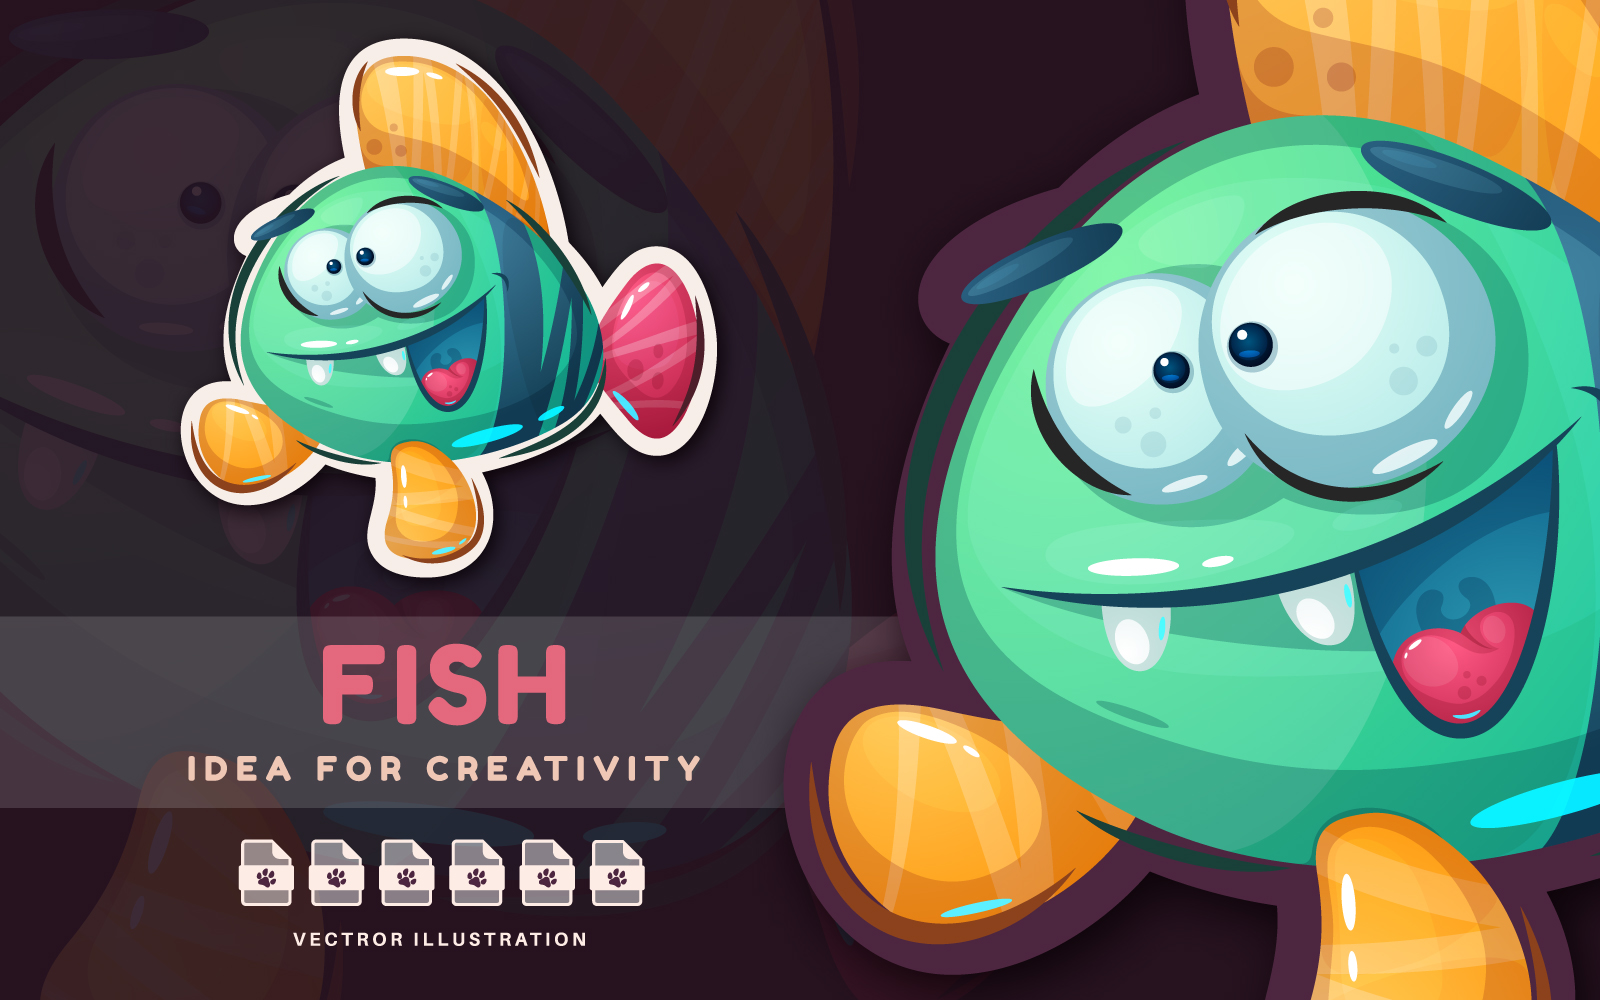 Crazy Fish Welcomes You - Cute Sticker, Graphics Illustration